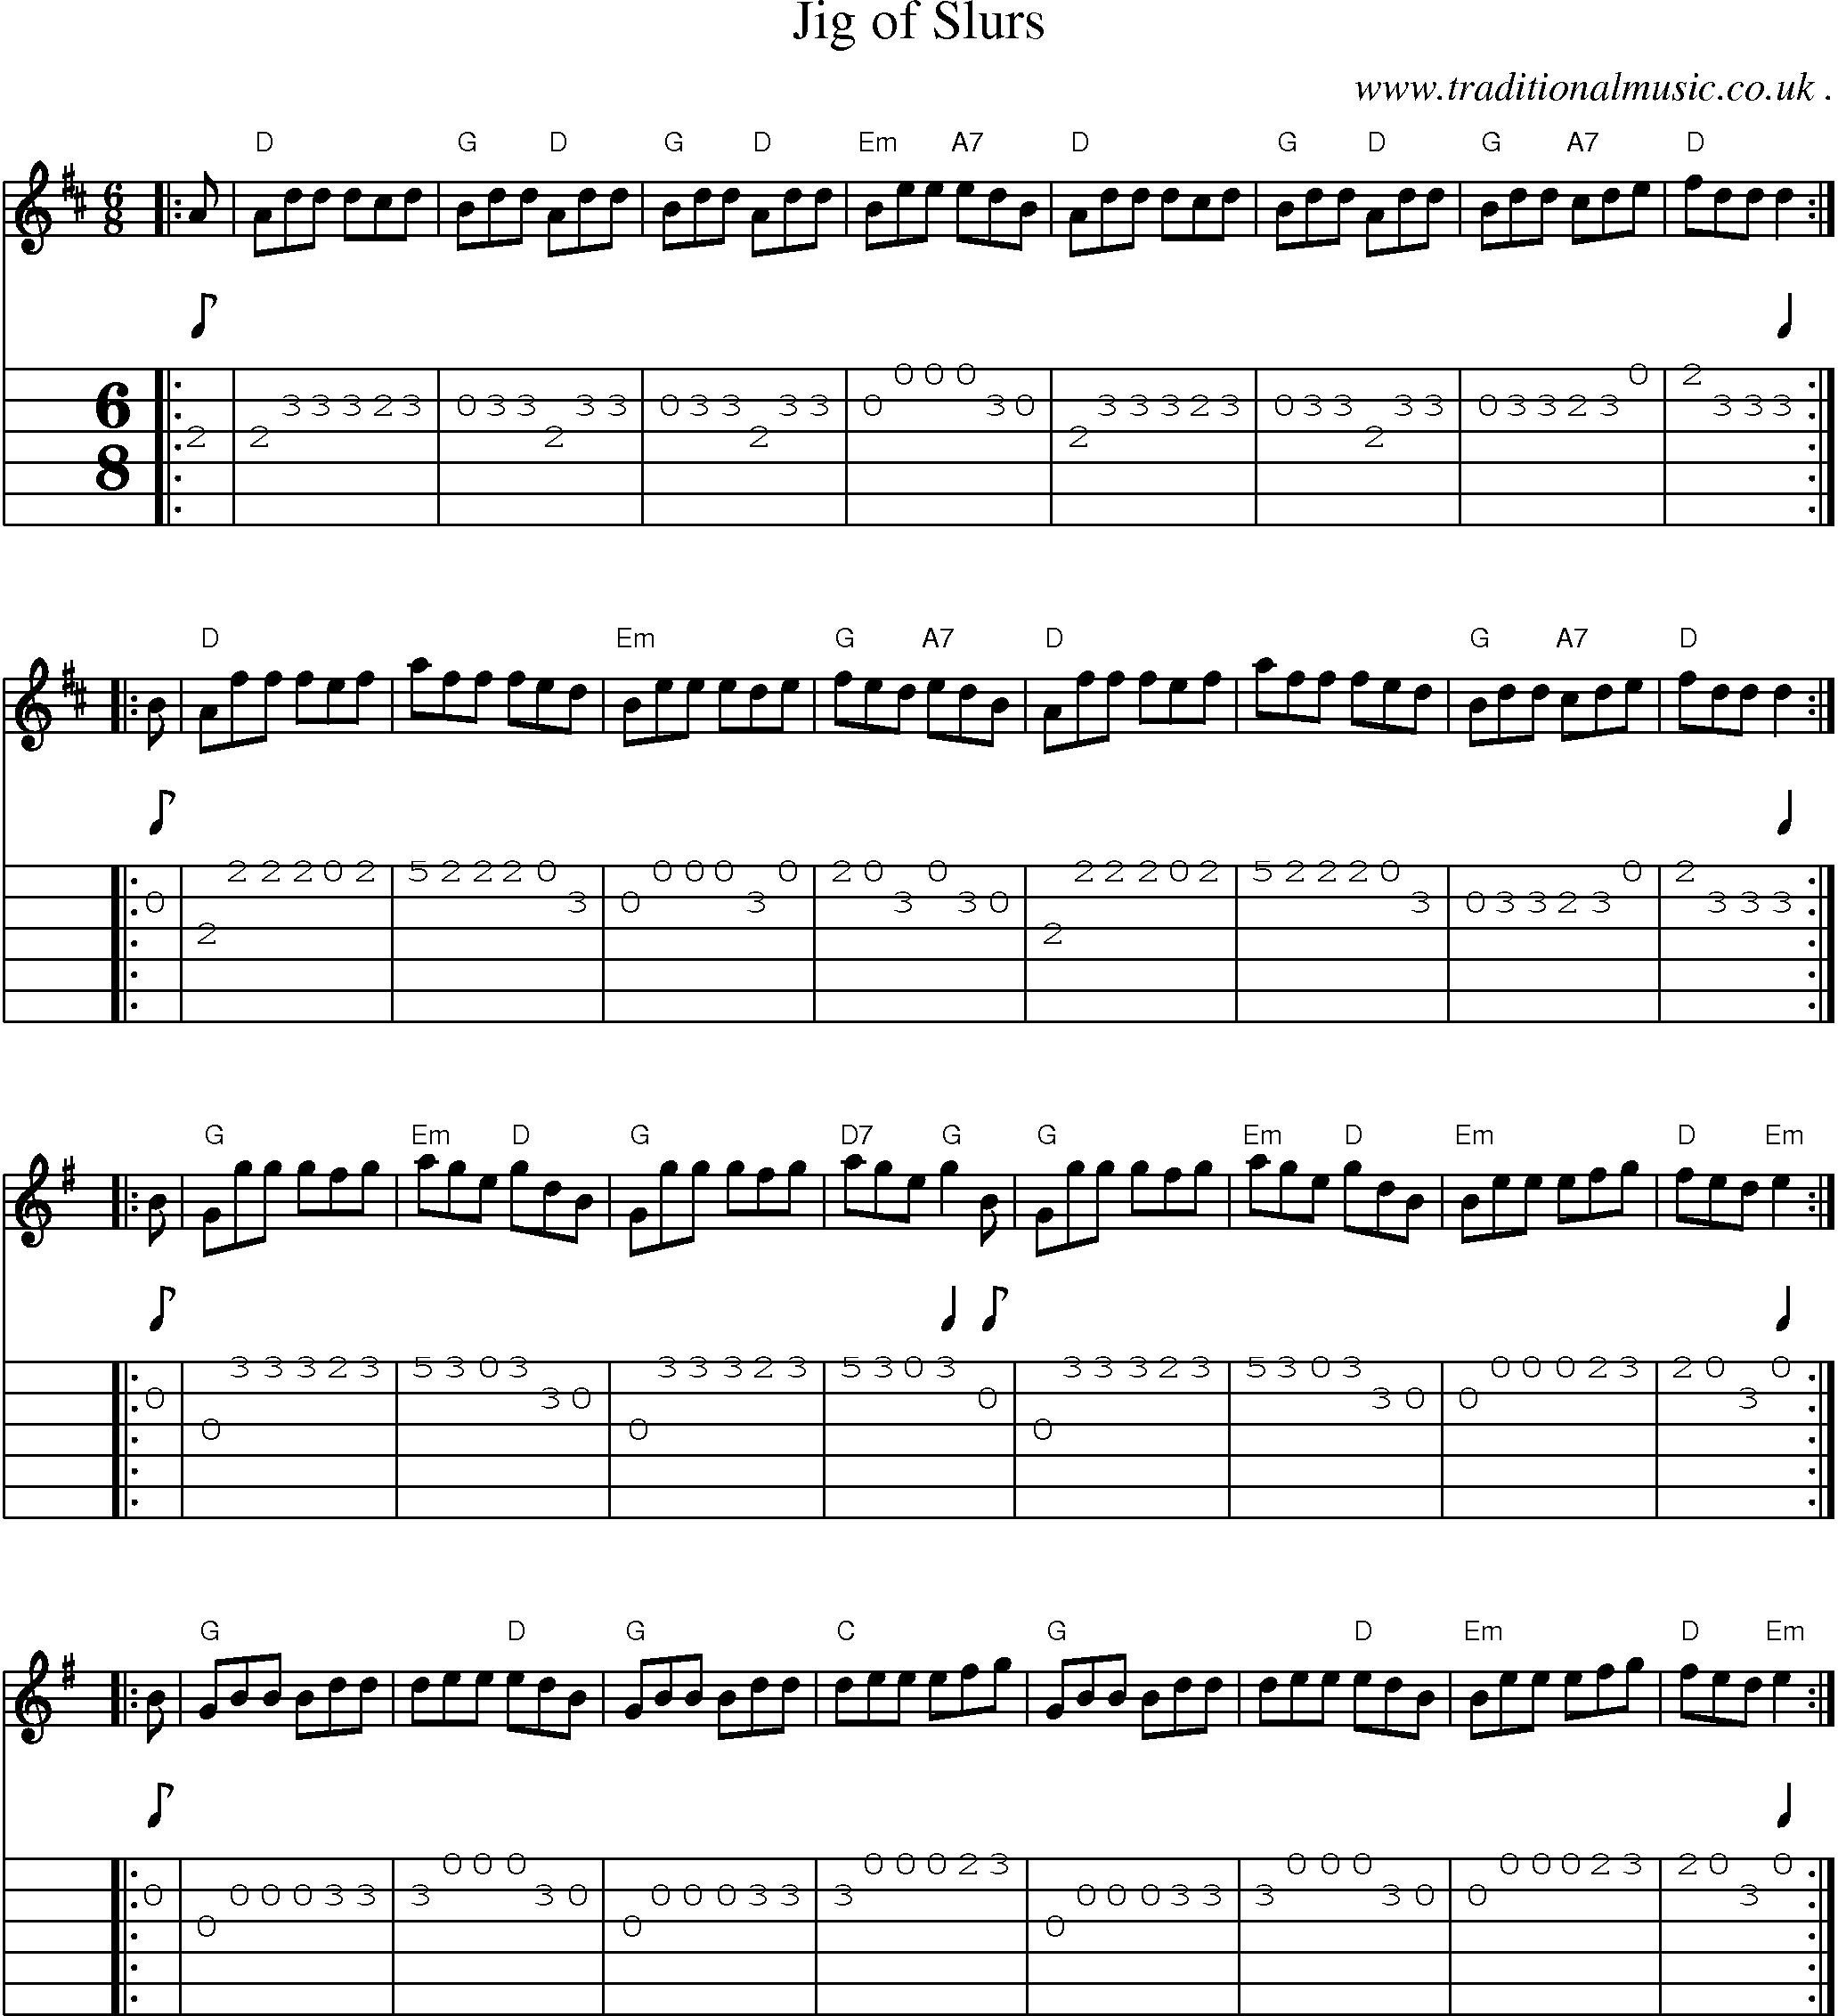 Sheet-music  score, Chords and Guitar Tabs for Jig Of Slurs